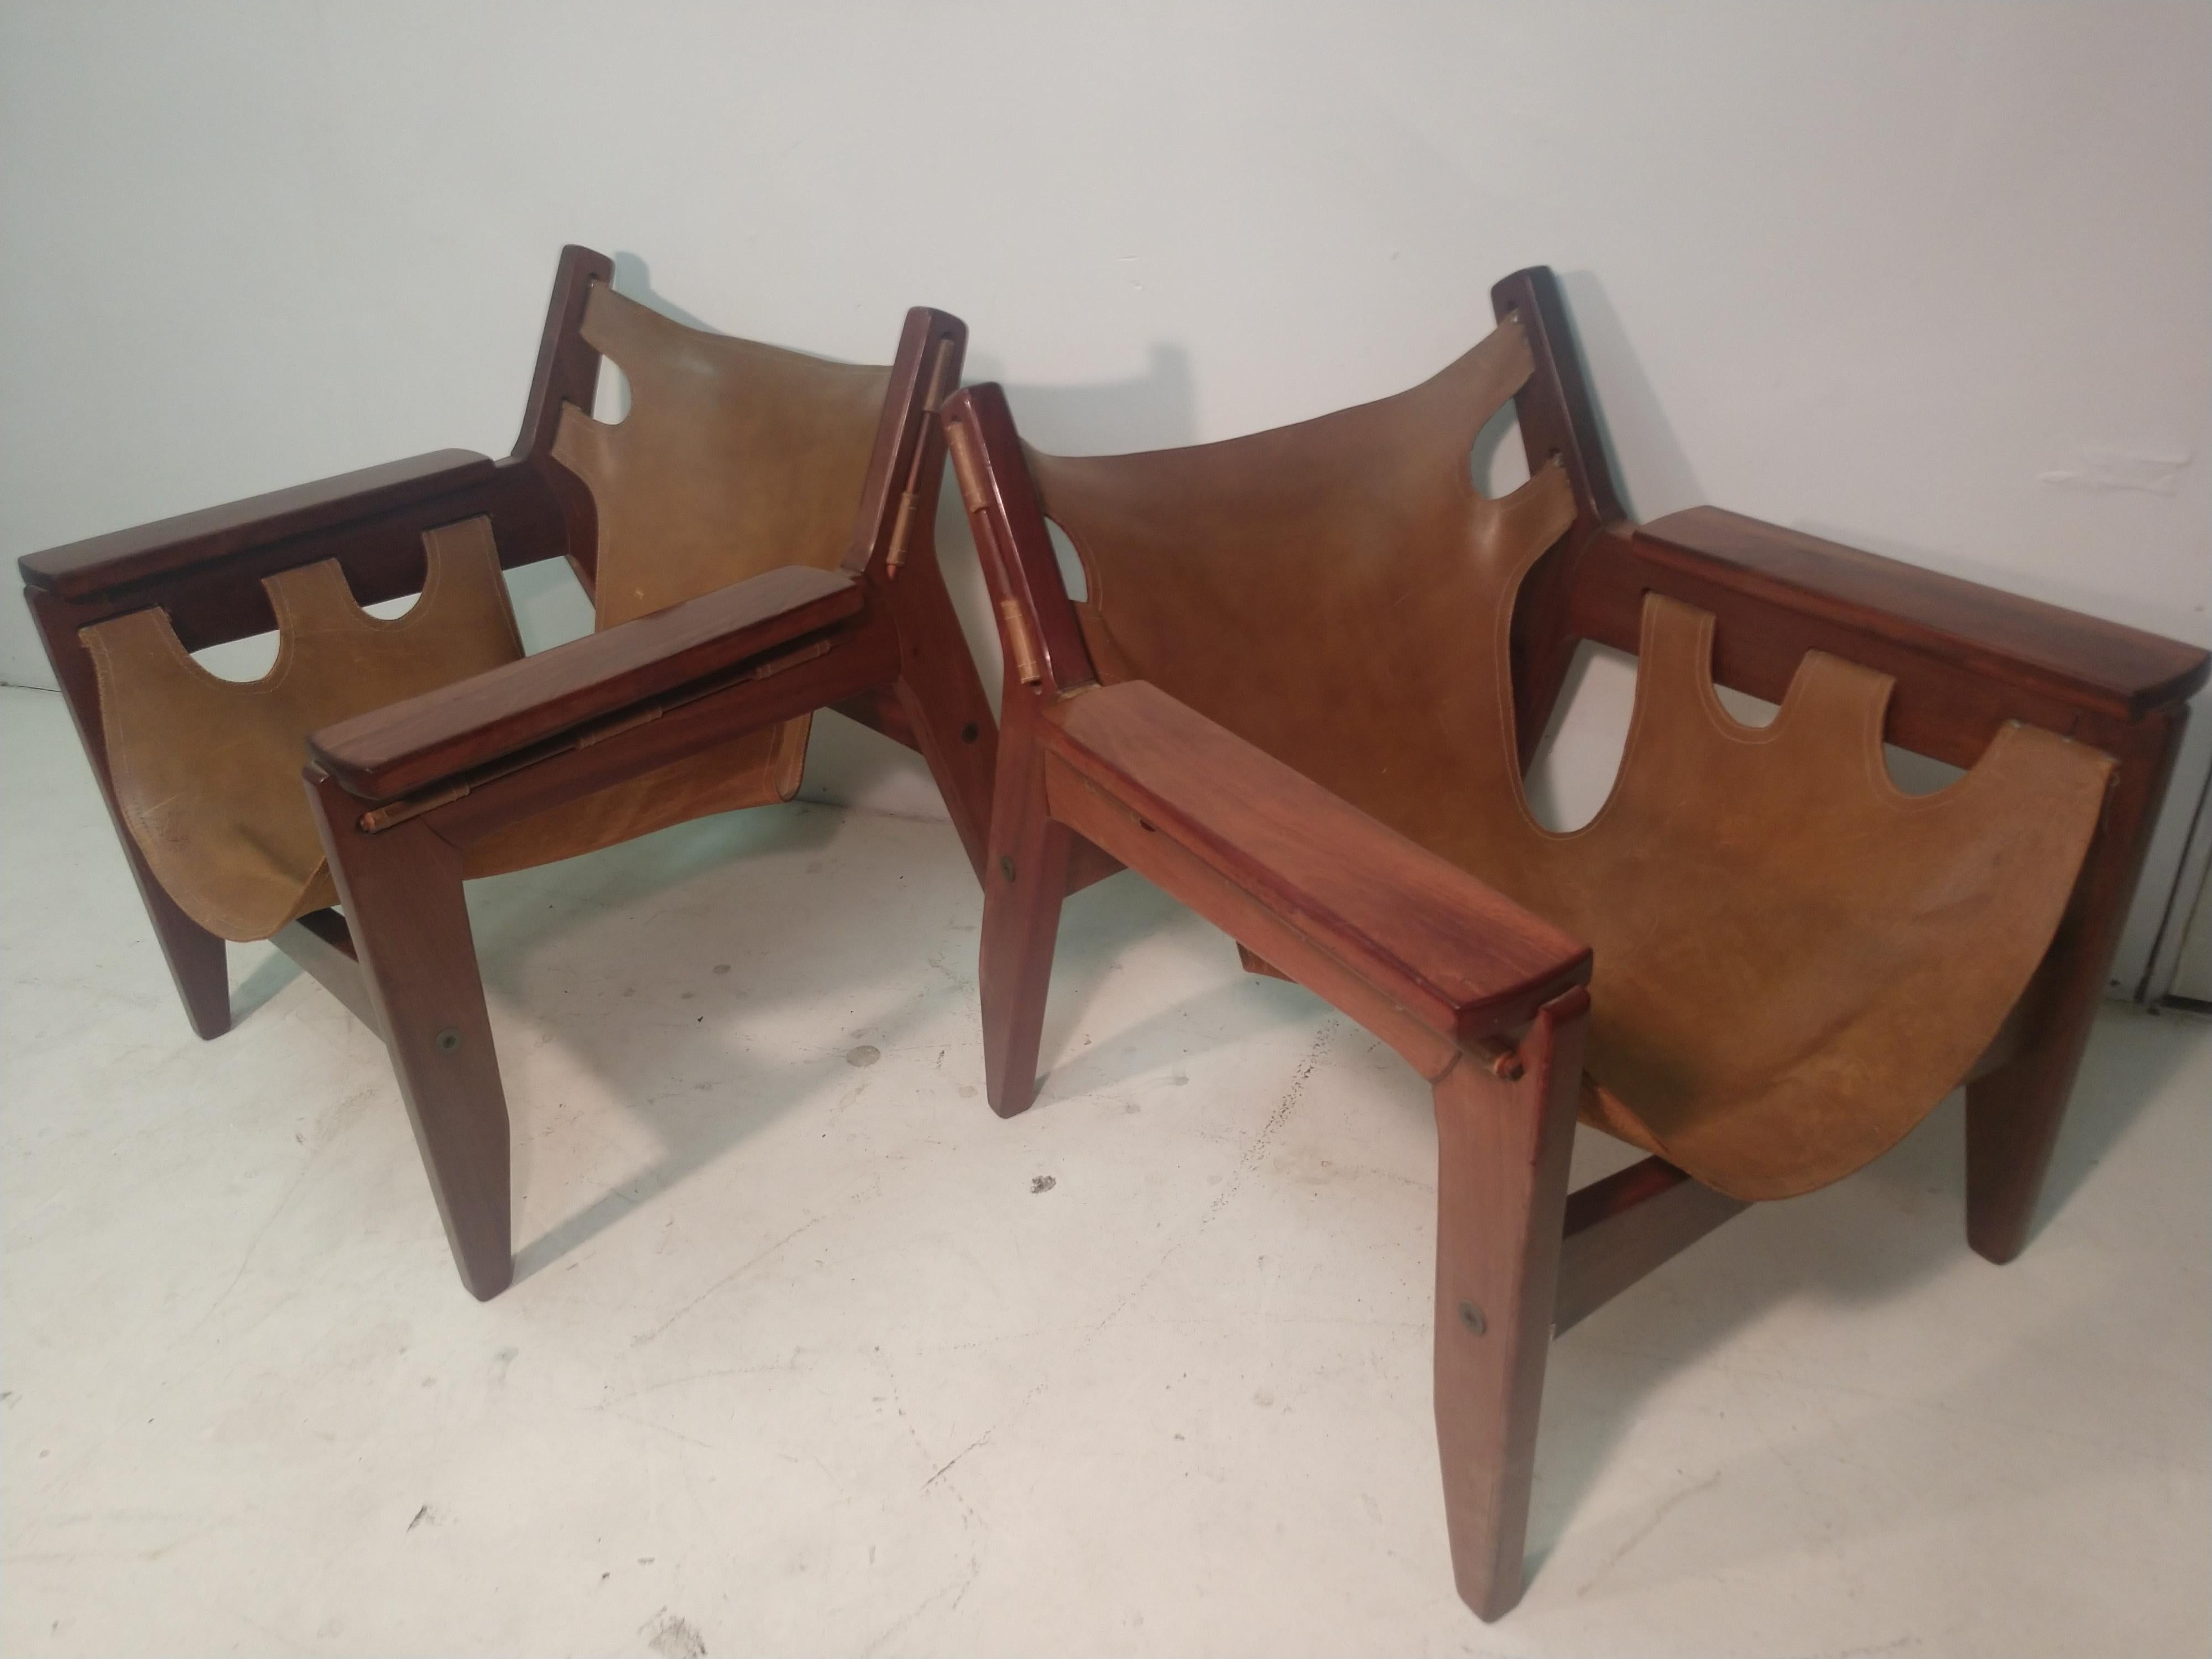 Brazilian Pair of Mid-Century Modern Rosewood & Leather Lounge Chairs by Sergio Rodrigues